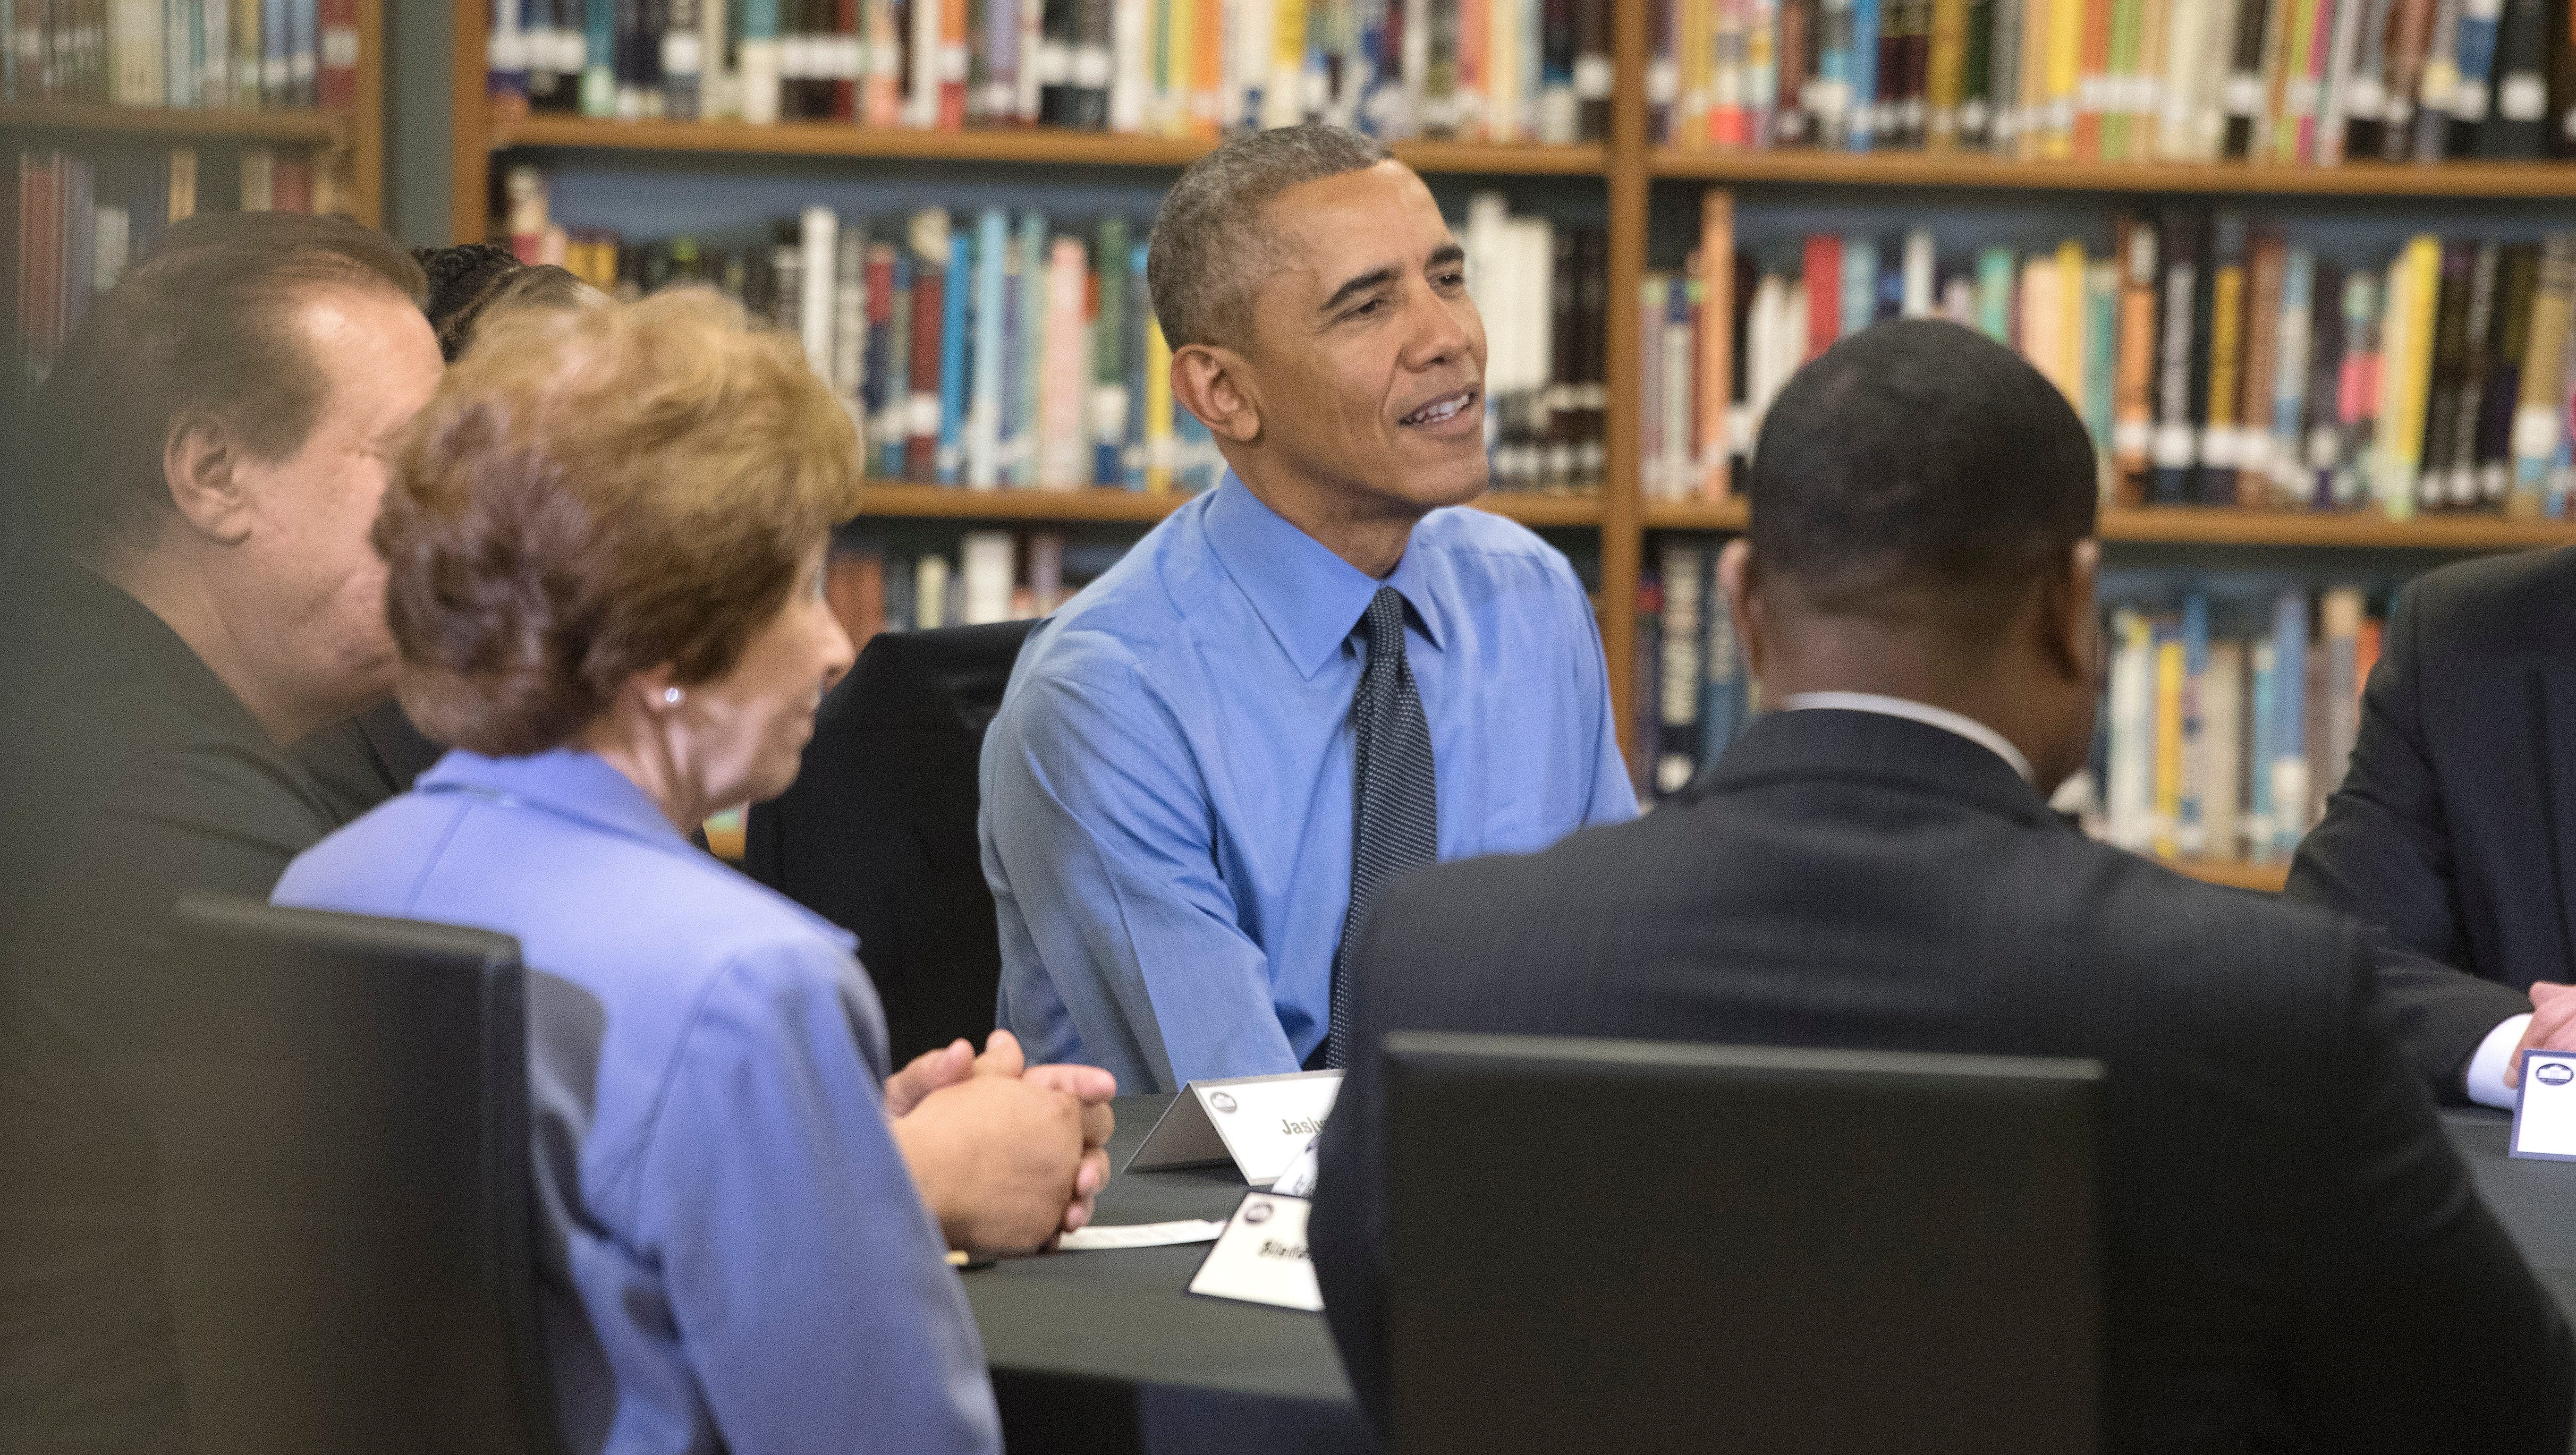 President Obama takes part in a round table discussion with Flint residents.